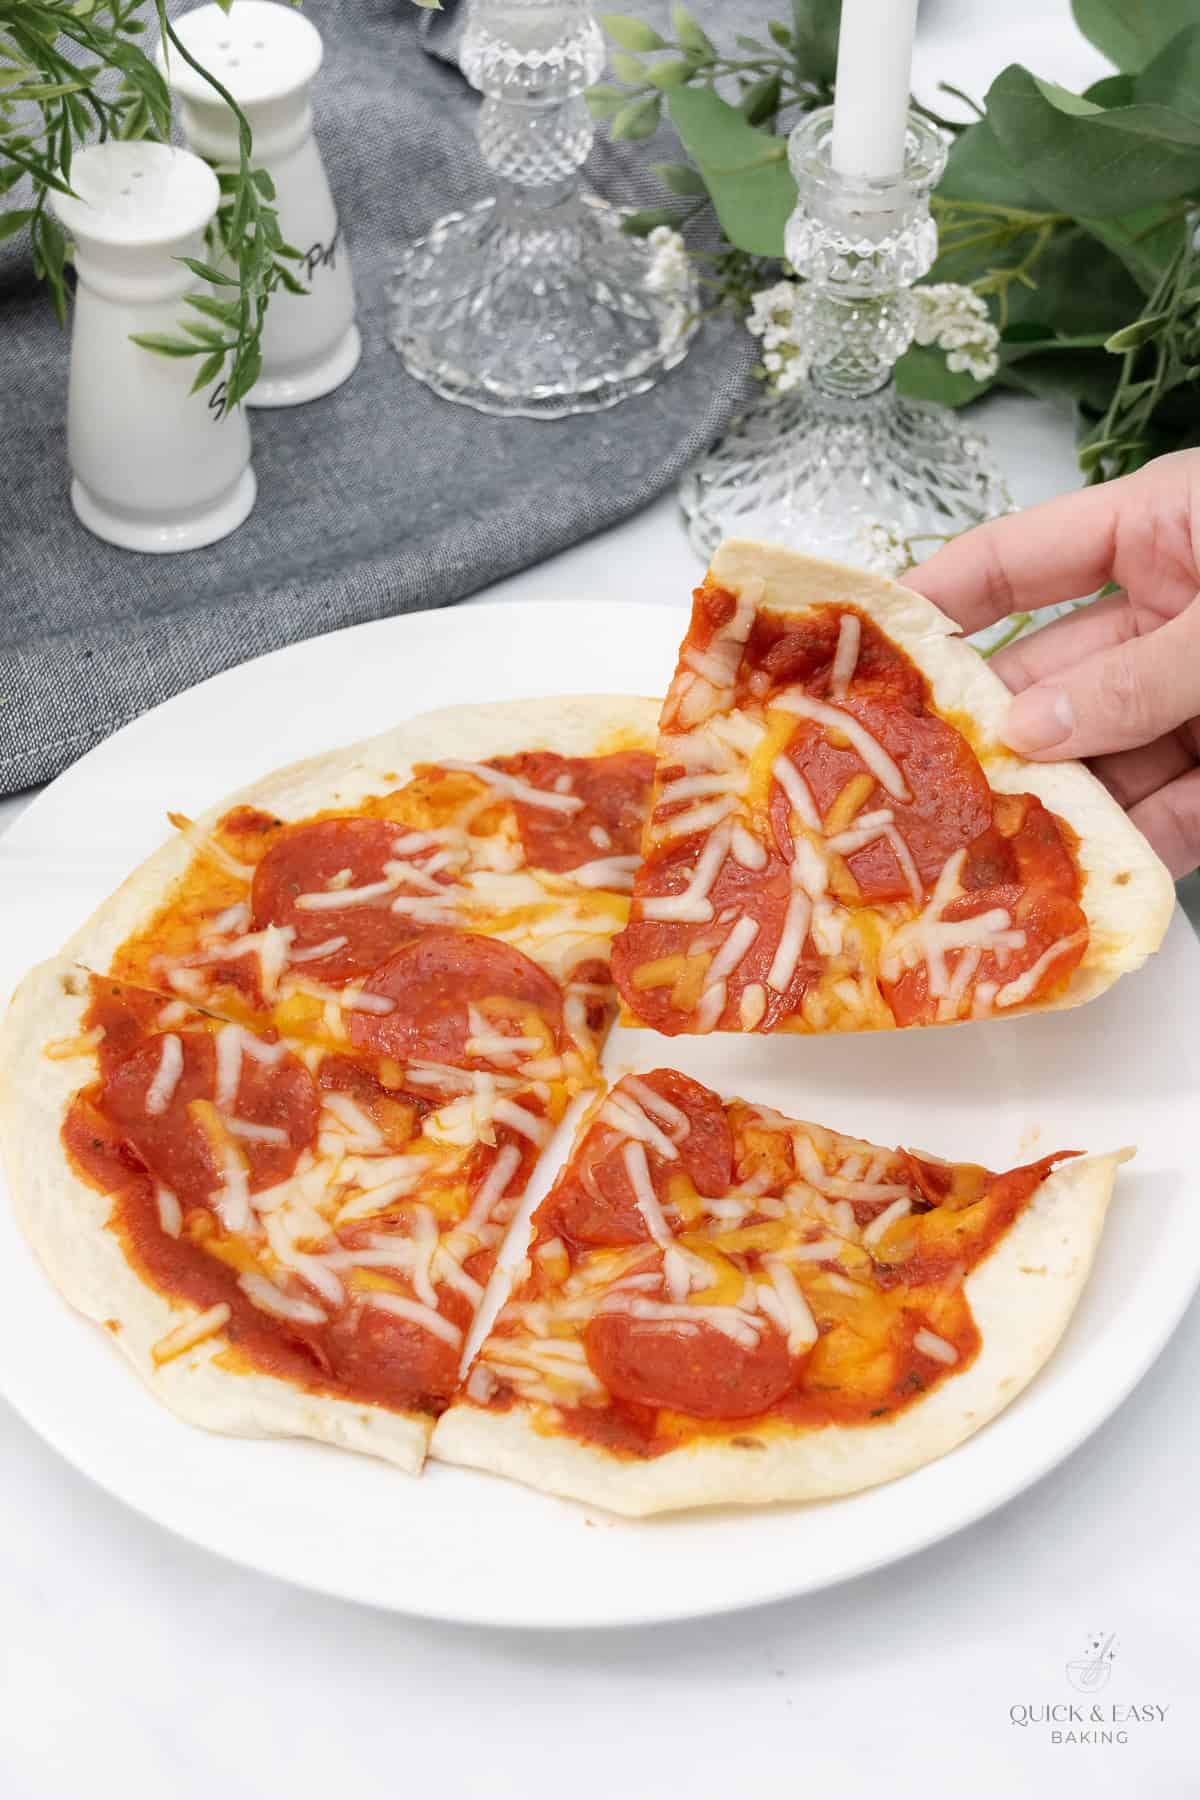 Top down image of mini pizza made with tortilla.